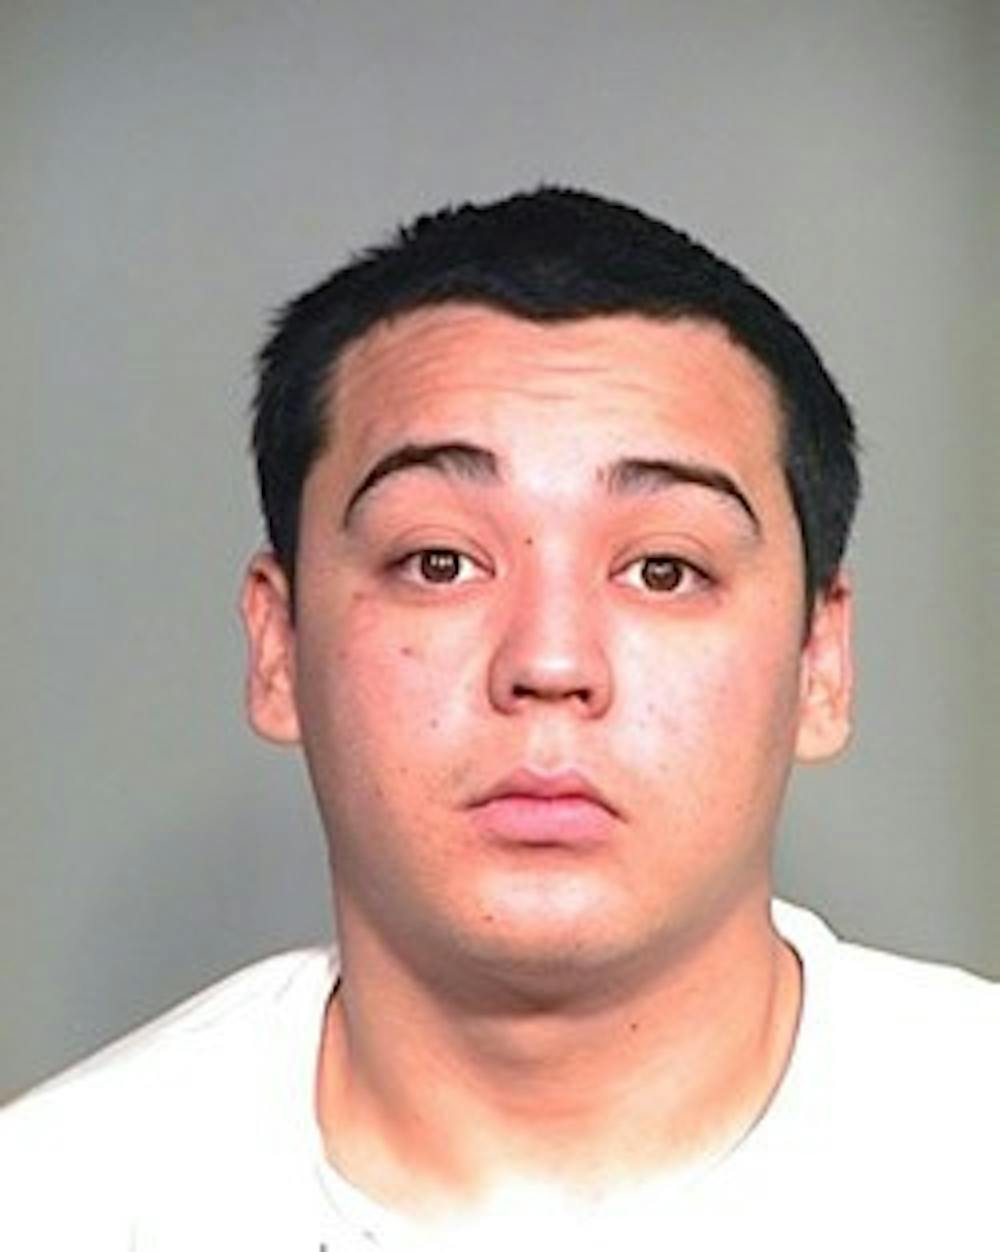 Police arrested 20-year-old Joseluis Marquez Tuesday in connection with the May 26 murder of ASU student Kyleigh Sousa.